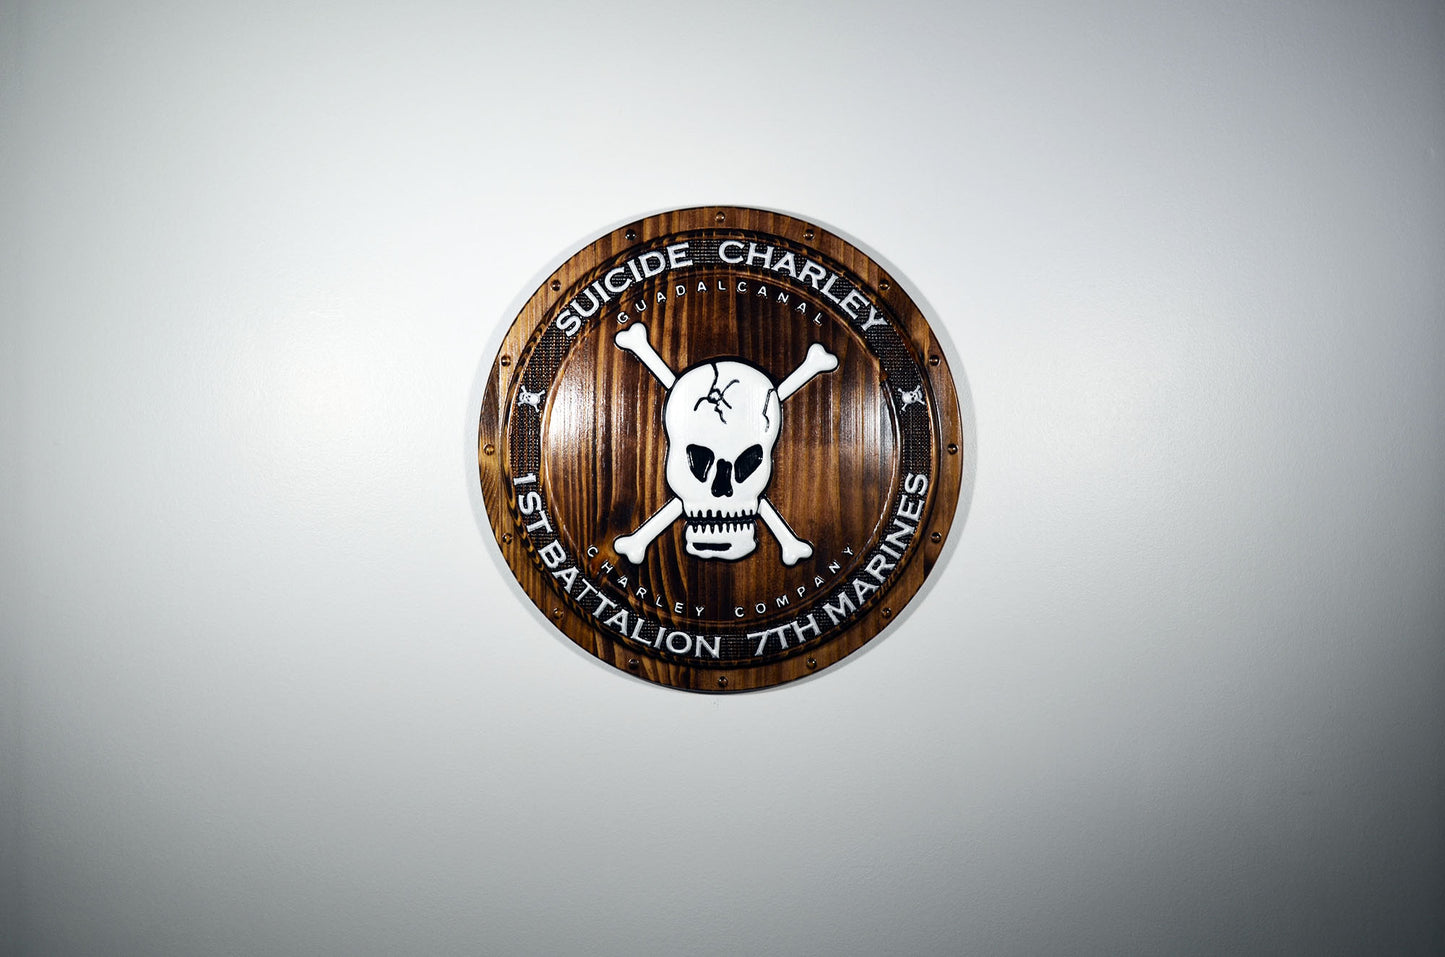 USMC 1st Battalion 7th Marines, Suicide Charley Company, 3d wood carving Shield, military plaque